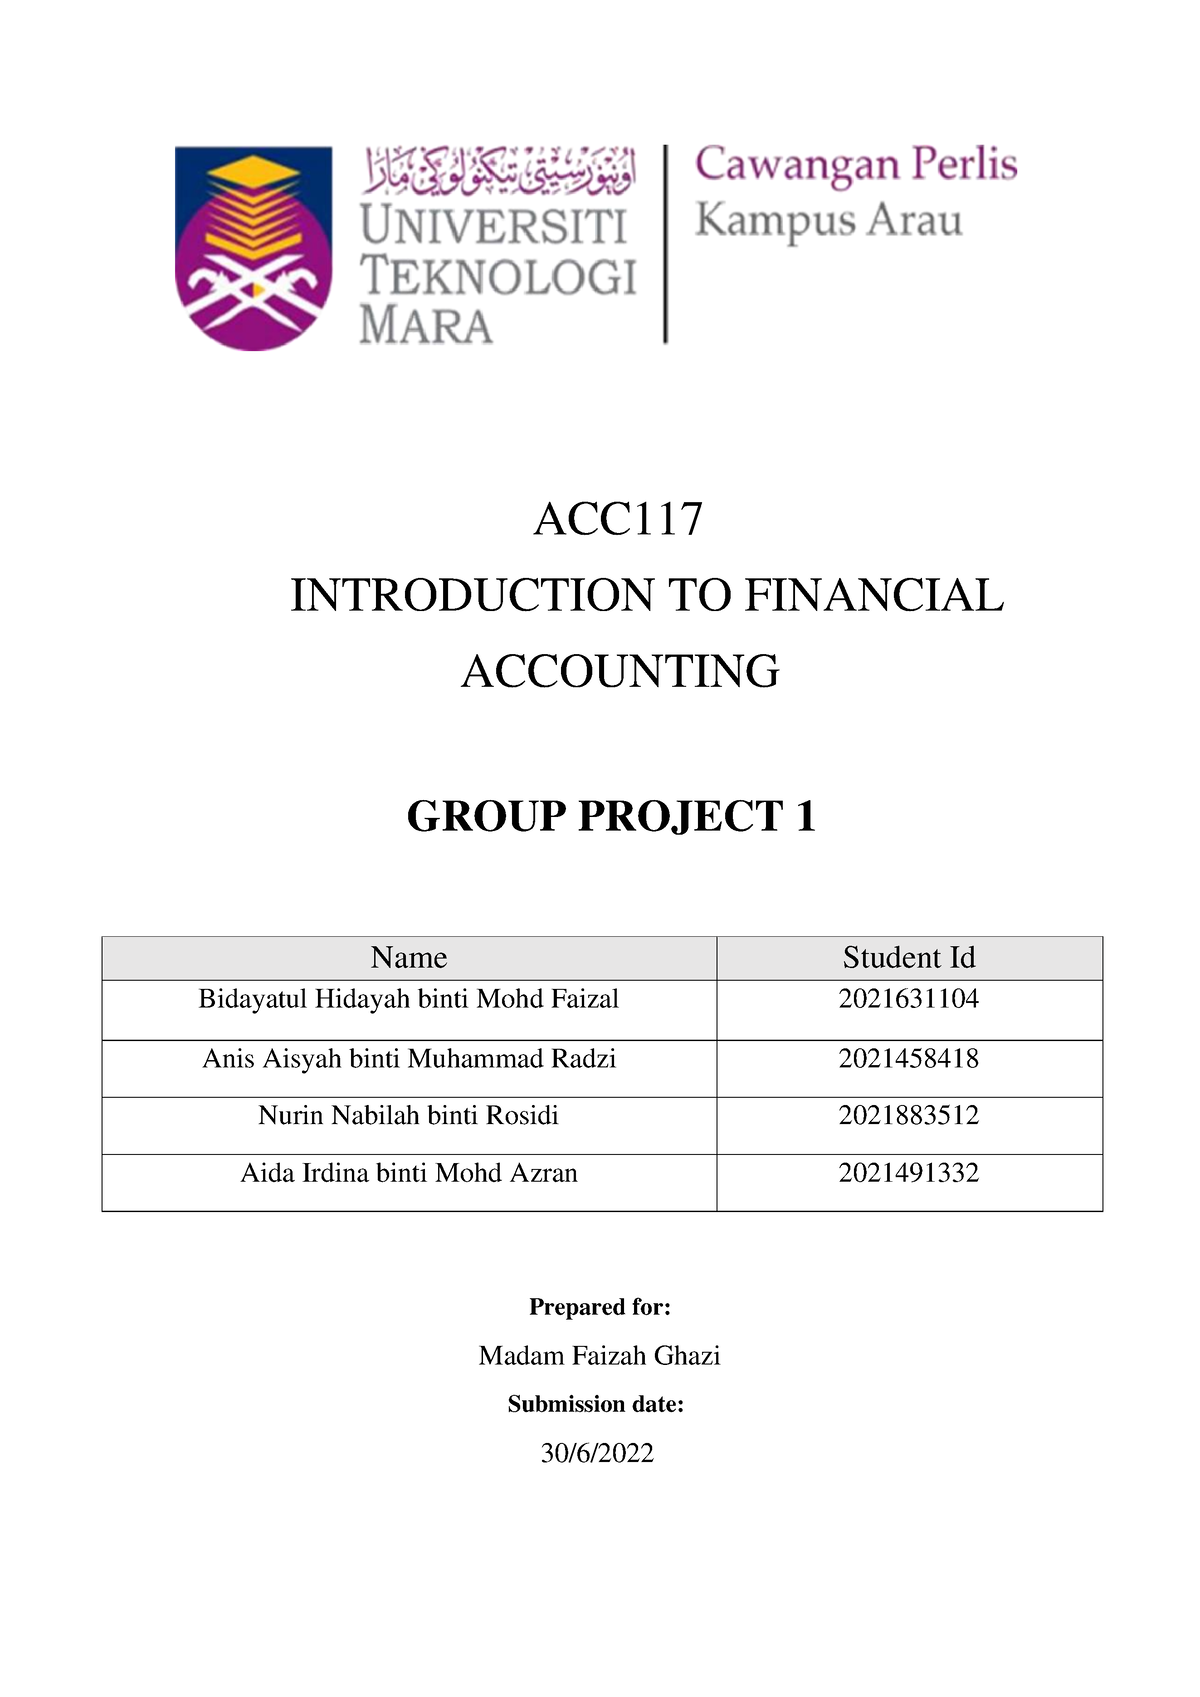 group assignment acc117 uitm